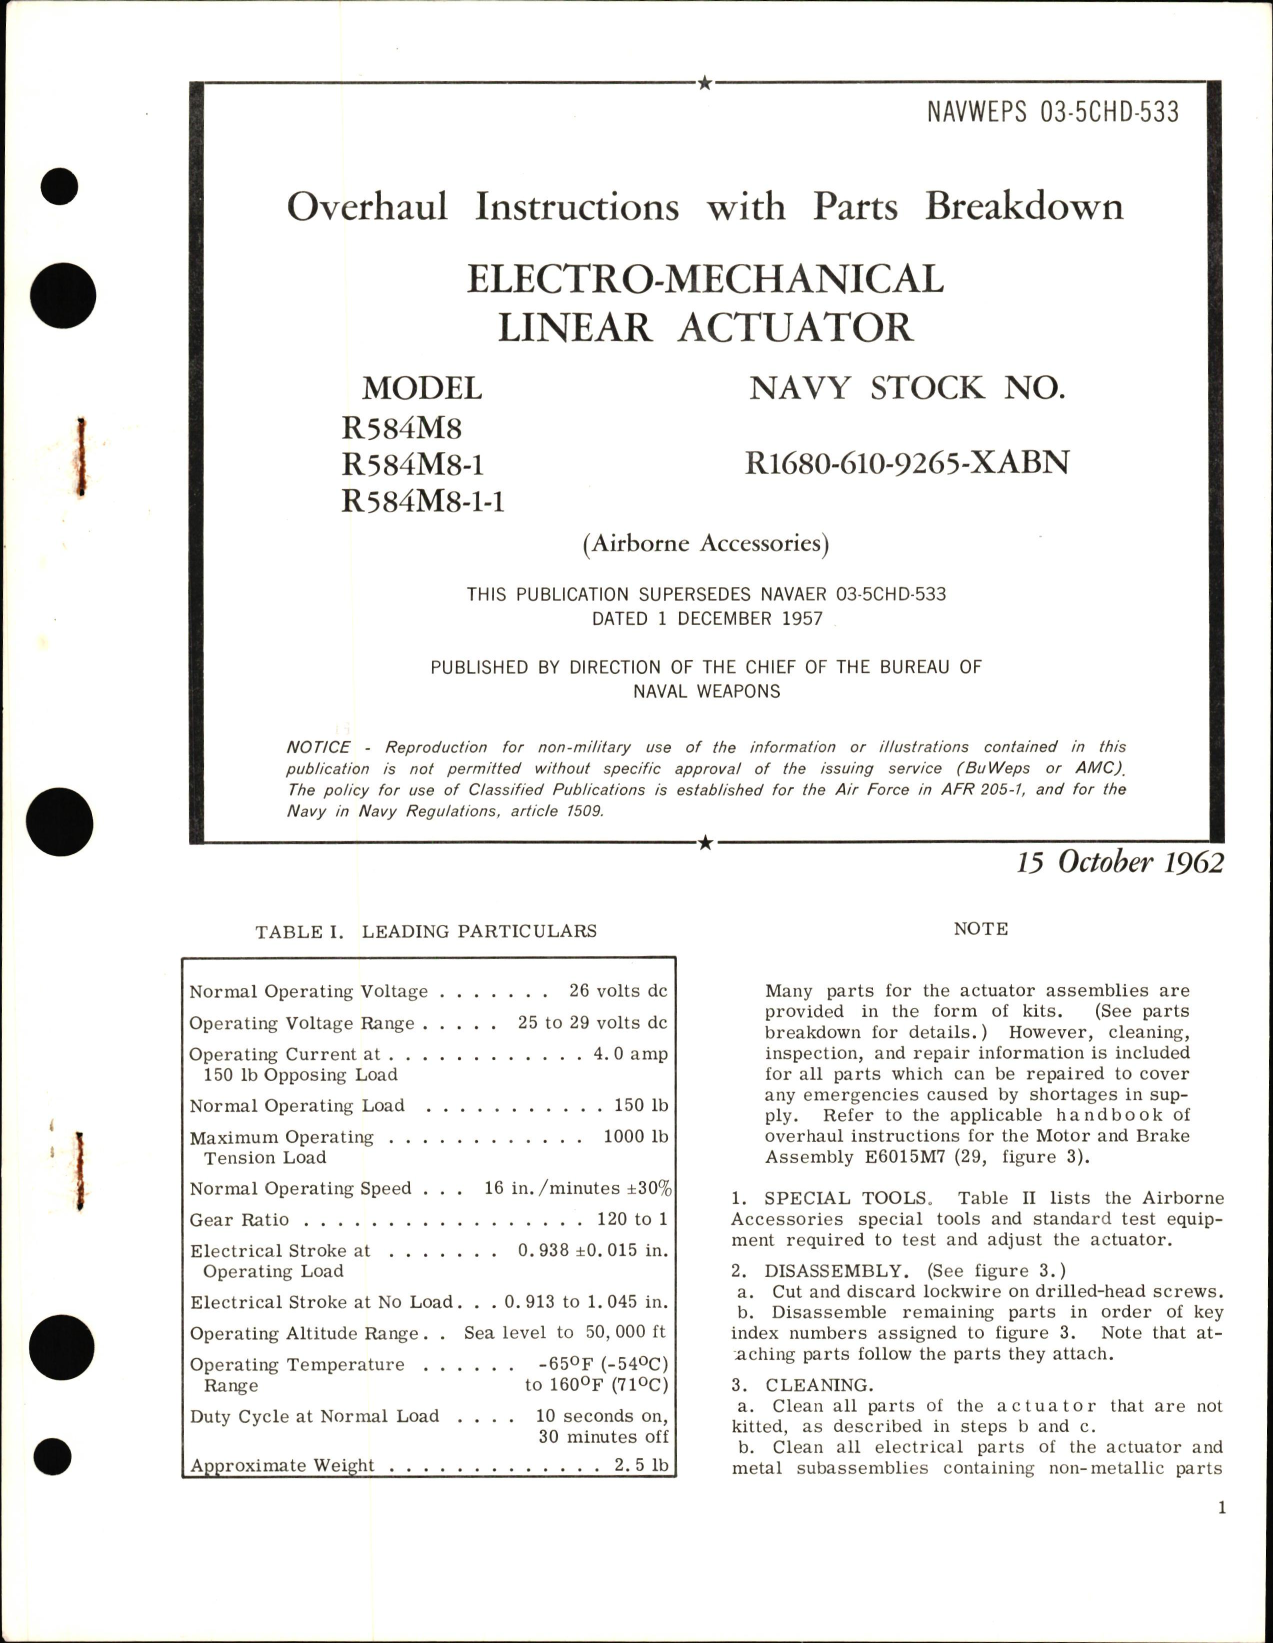 Sample page 1 from AirCorps Library document: Overhaul Instructions with Parts Breakdown for Electro-Mechanical Linear Actuator Models R584M8, R584M8-1, R584M8-1-1